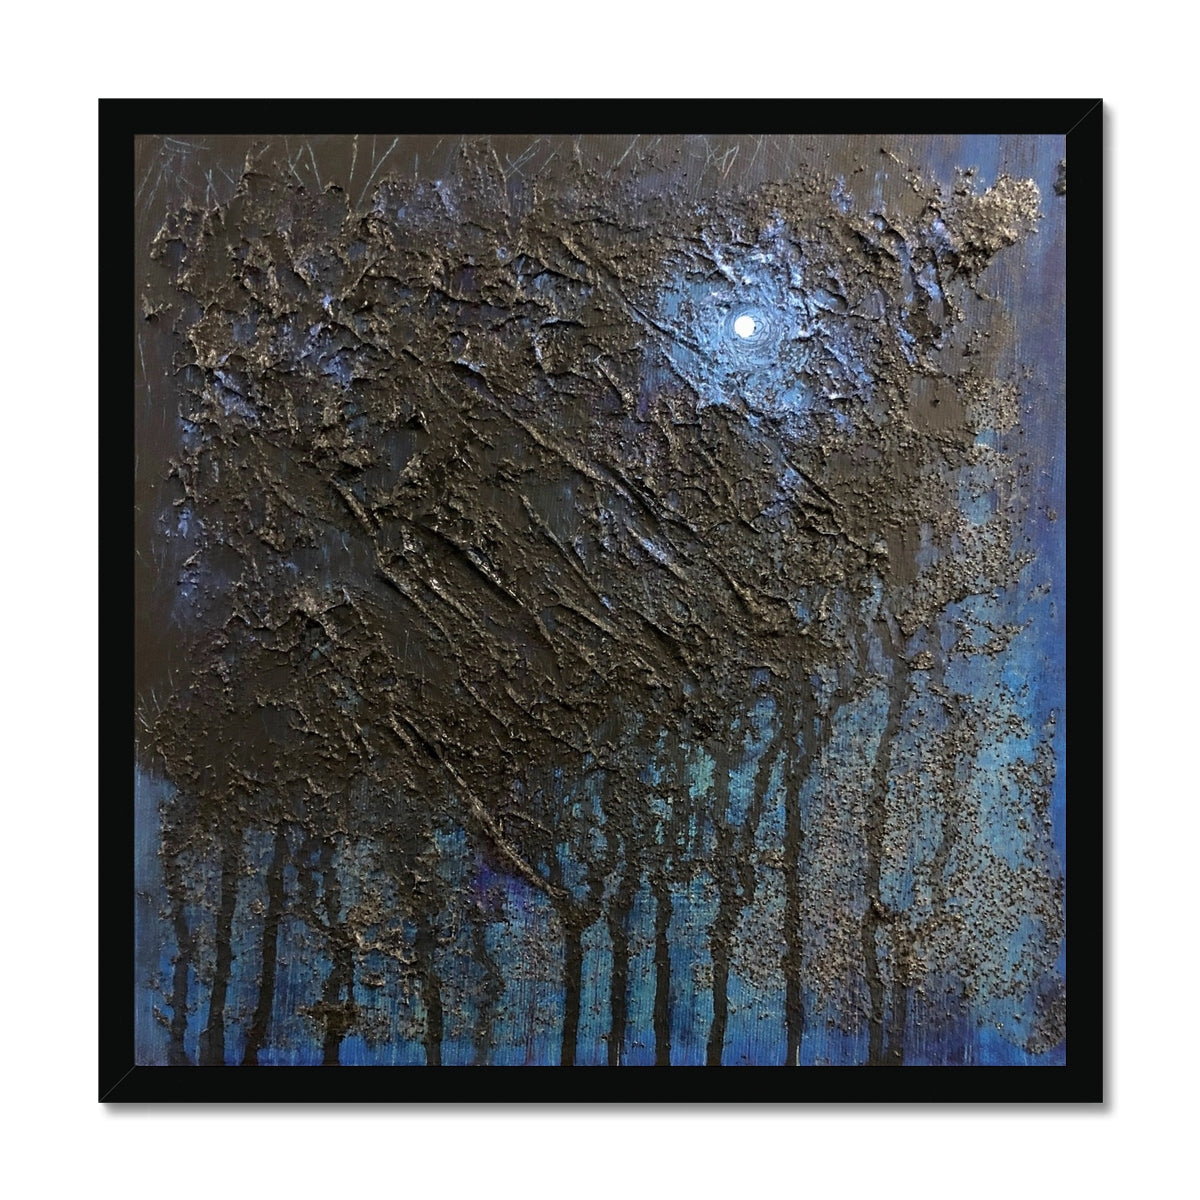 The Blue Moon Wood Abstract Painting | Framed Prints From Scotland-Framed Prints-Abstract & Impressionistic Art Gallery-20"x20"-Black Frame-Paintings, Prints, Homeware, Art Gifts From Scotland By Scottish Artist Kevin Hunter